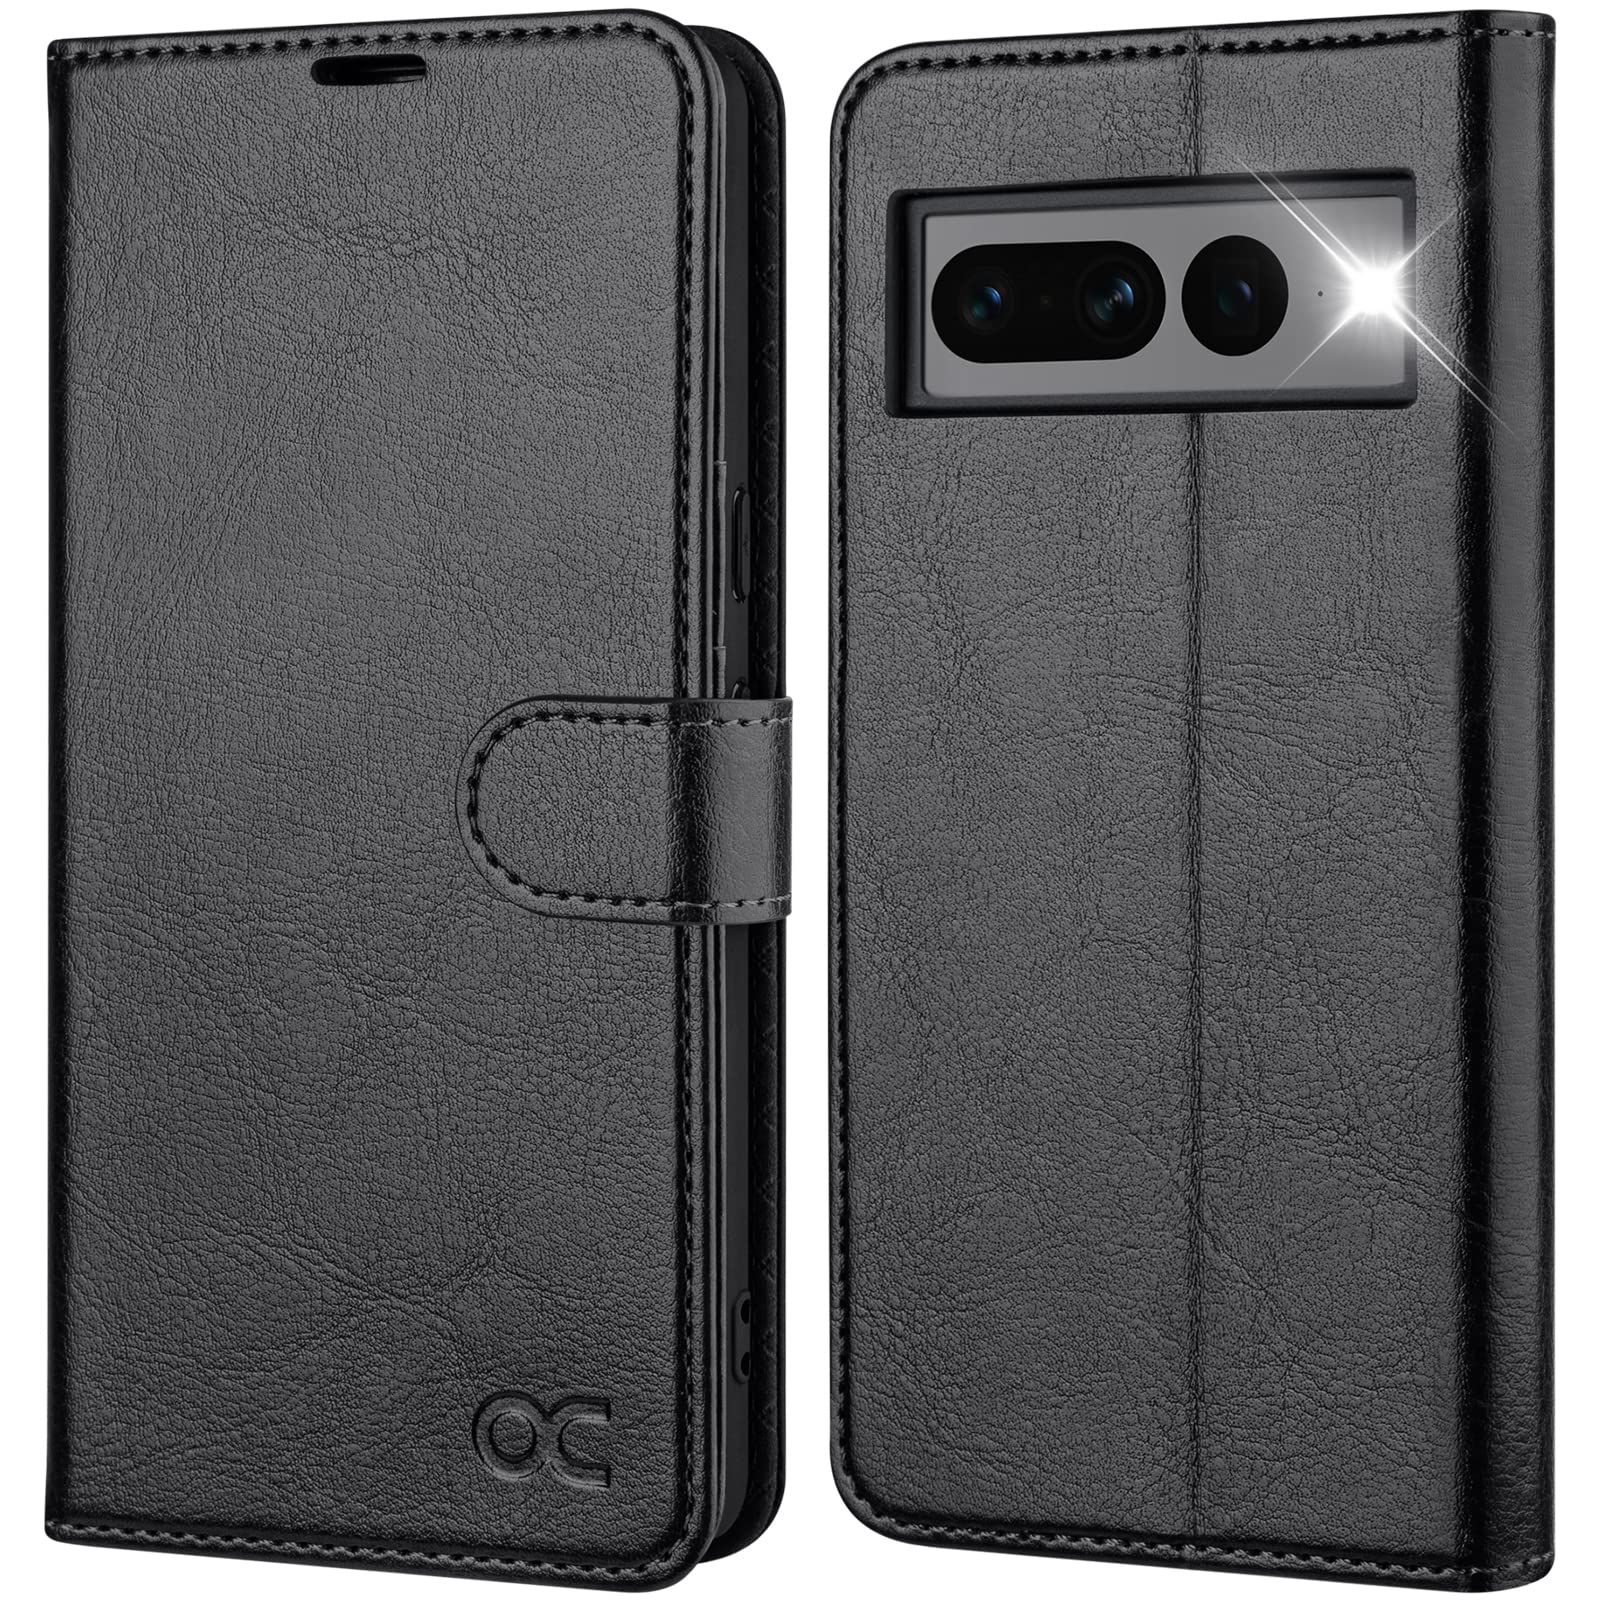 OCASE Compatible with Google Pixel 7 Pro 5G Wallet Case PU Leather Flip Folio Case with Card Holders RFID Blocking Kickstand [Shockproof TPU Inner Shell] Phone Cover 6.7 Inch 2022 (Black)